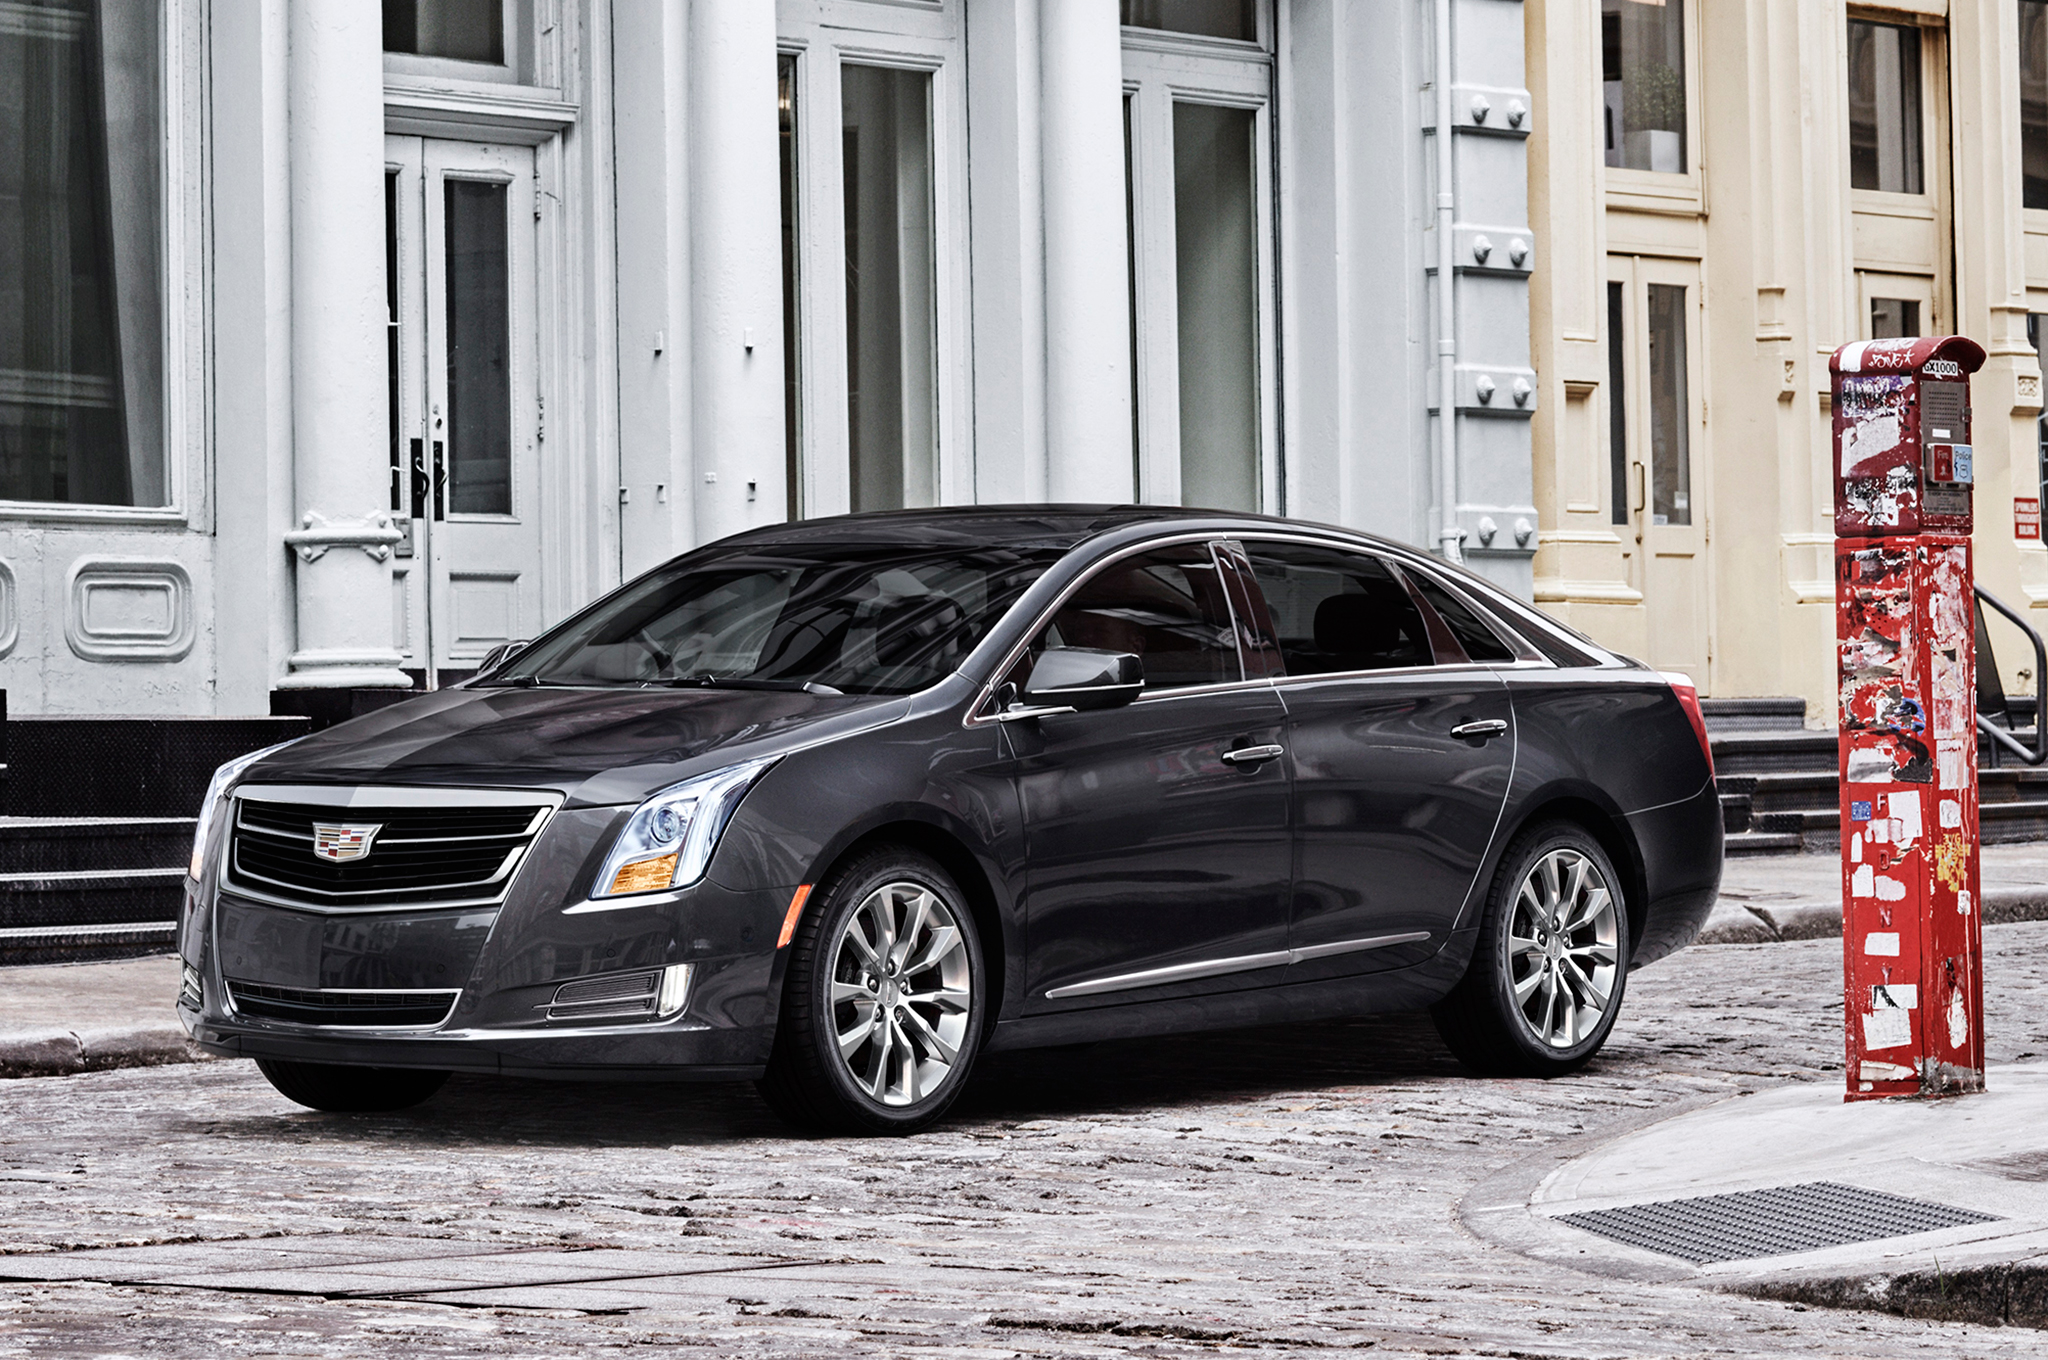 Cadillac XTS Backgrounds on Wallpapers Vista